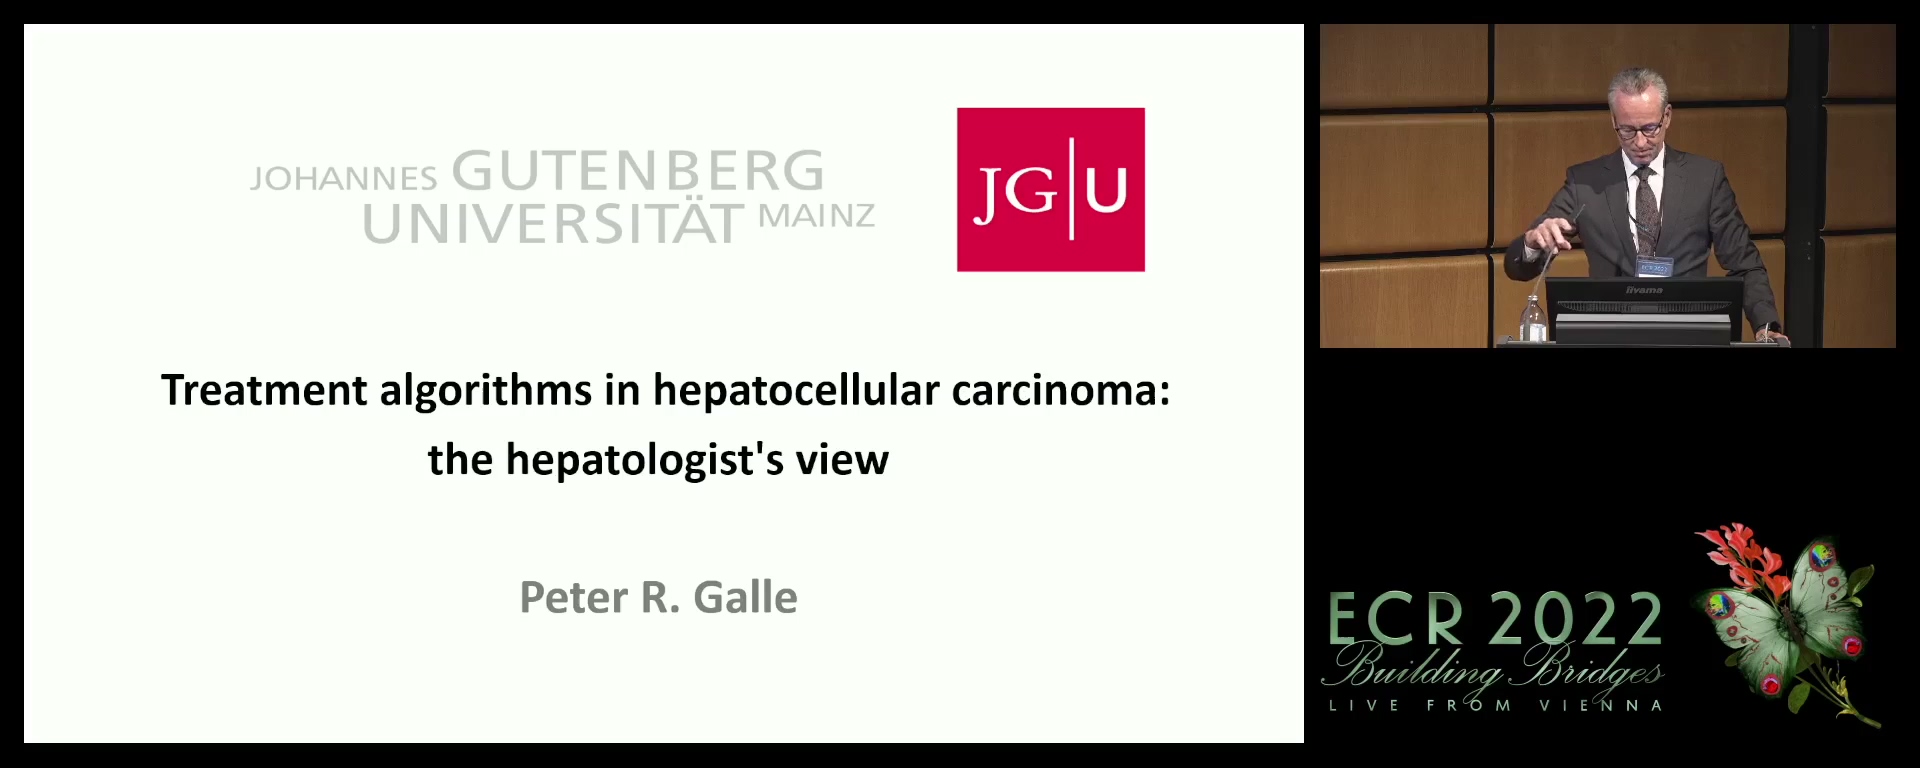 Treatment algorithms in hepatocellular carcinoma: the hepatologist's view